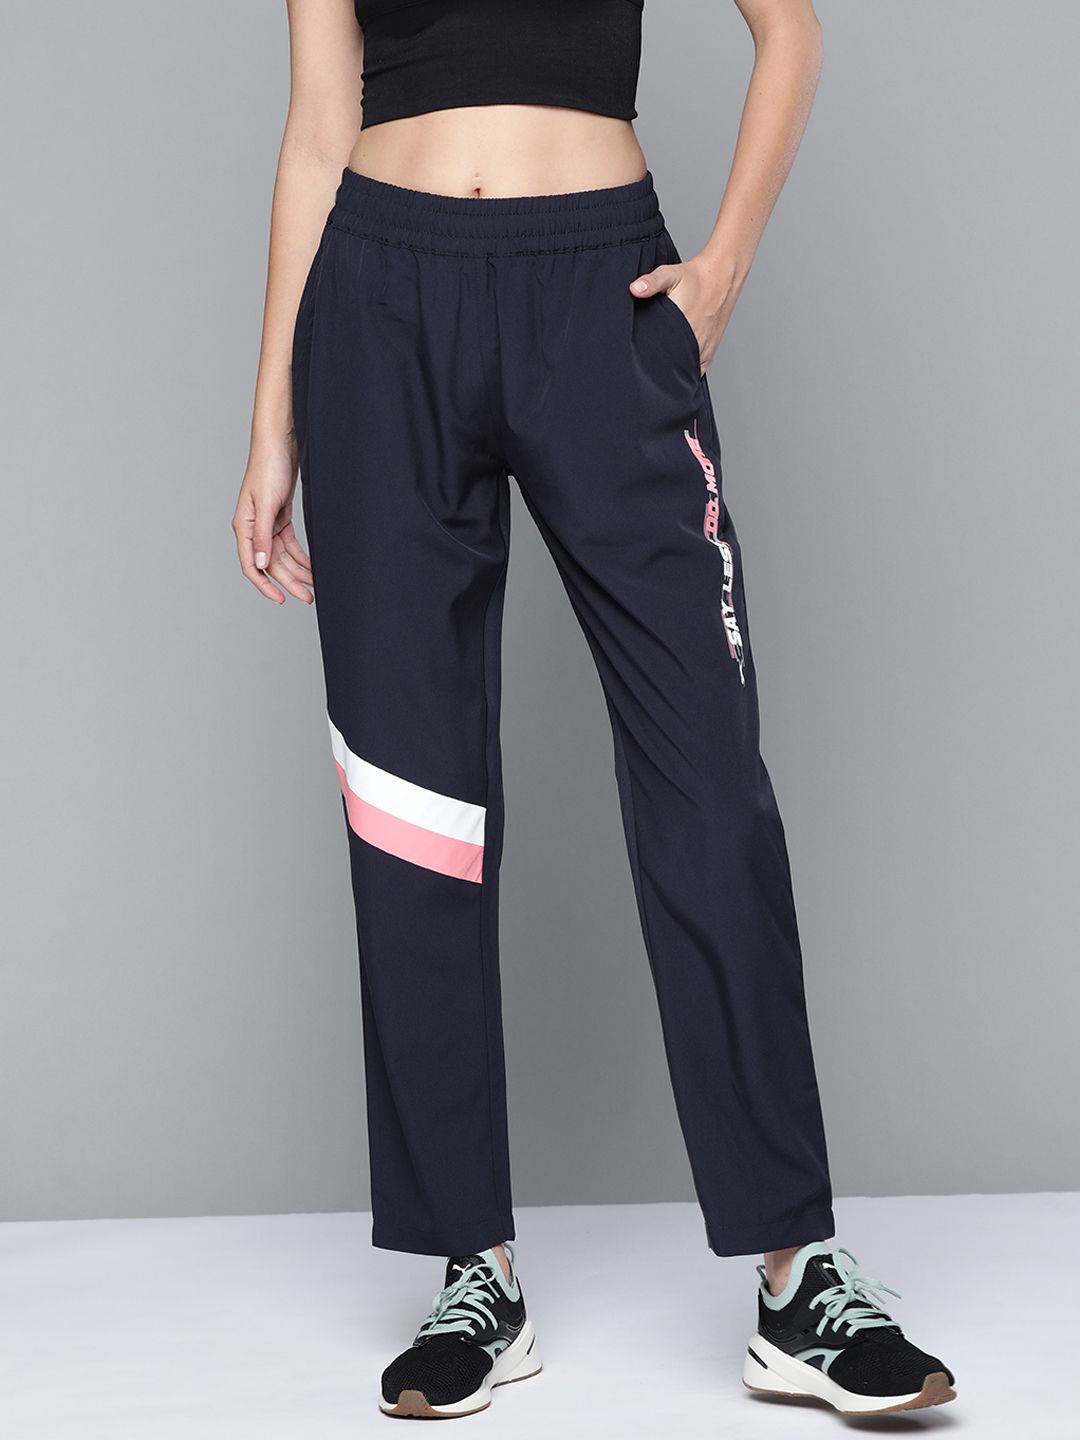 Slazenger Women Navy Blue Typography Printed Ultra-Dry Running Track Pants Price in India